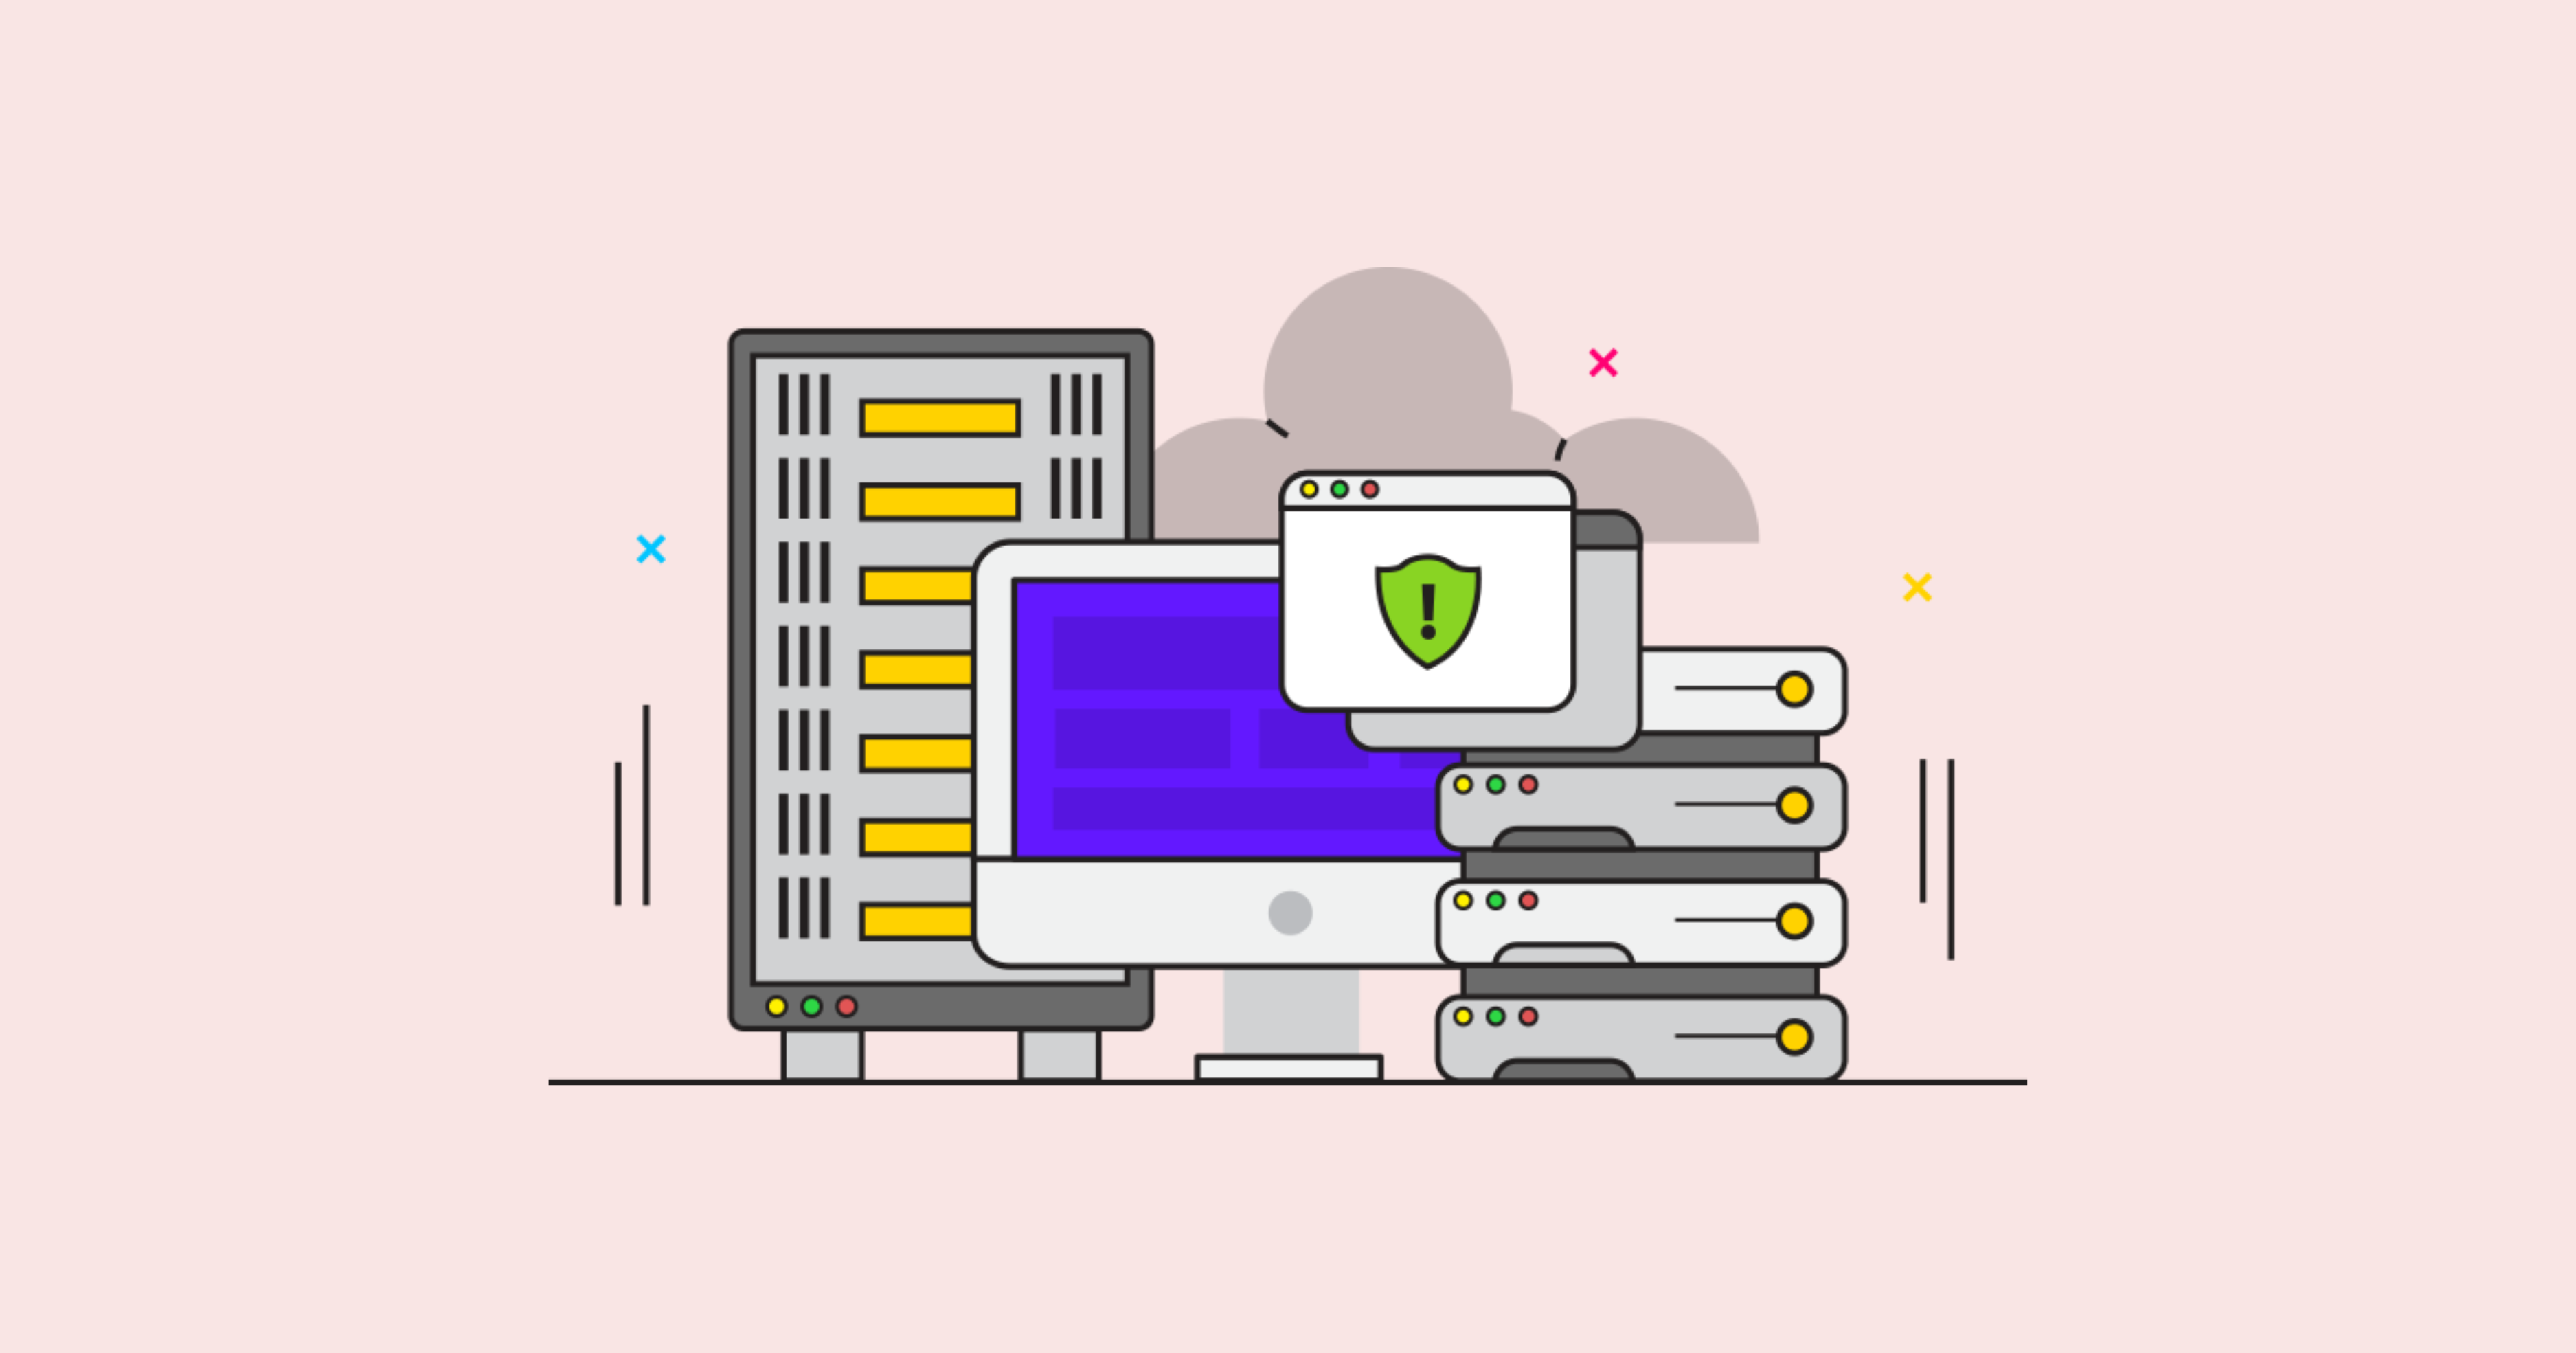 A dedicated hosting server keeps the digital environment safe & reliable with backups